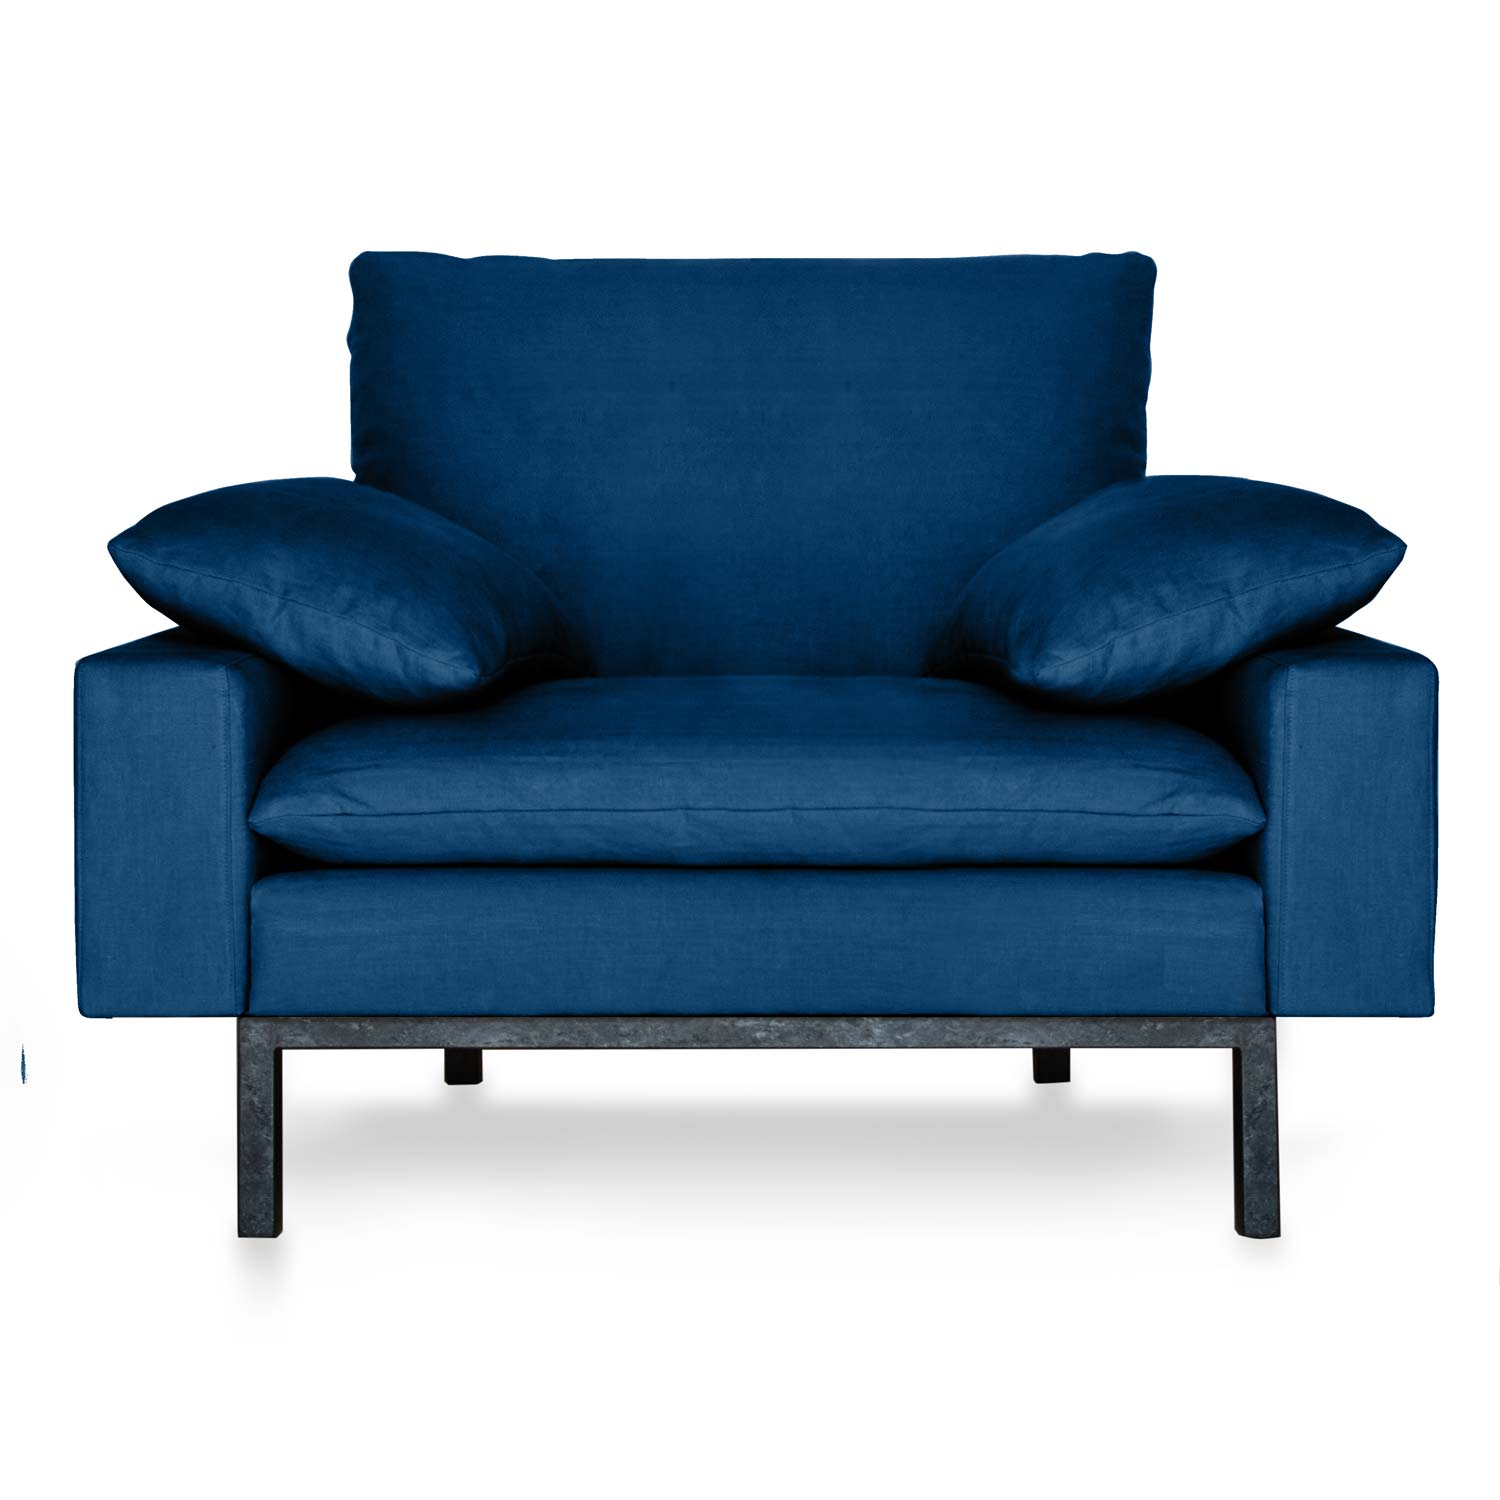 Contemporary Twist on 50s Aesthetic. Navy sustainable armchair.